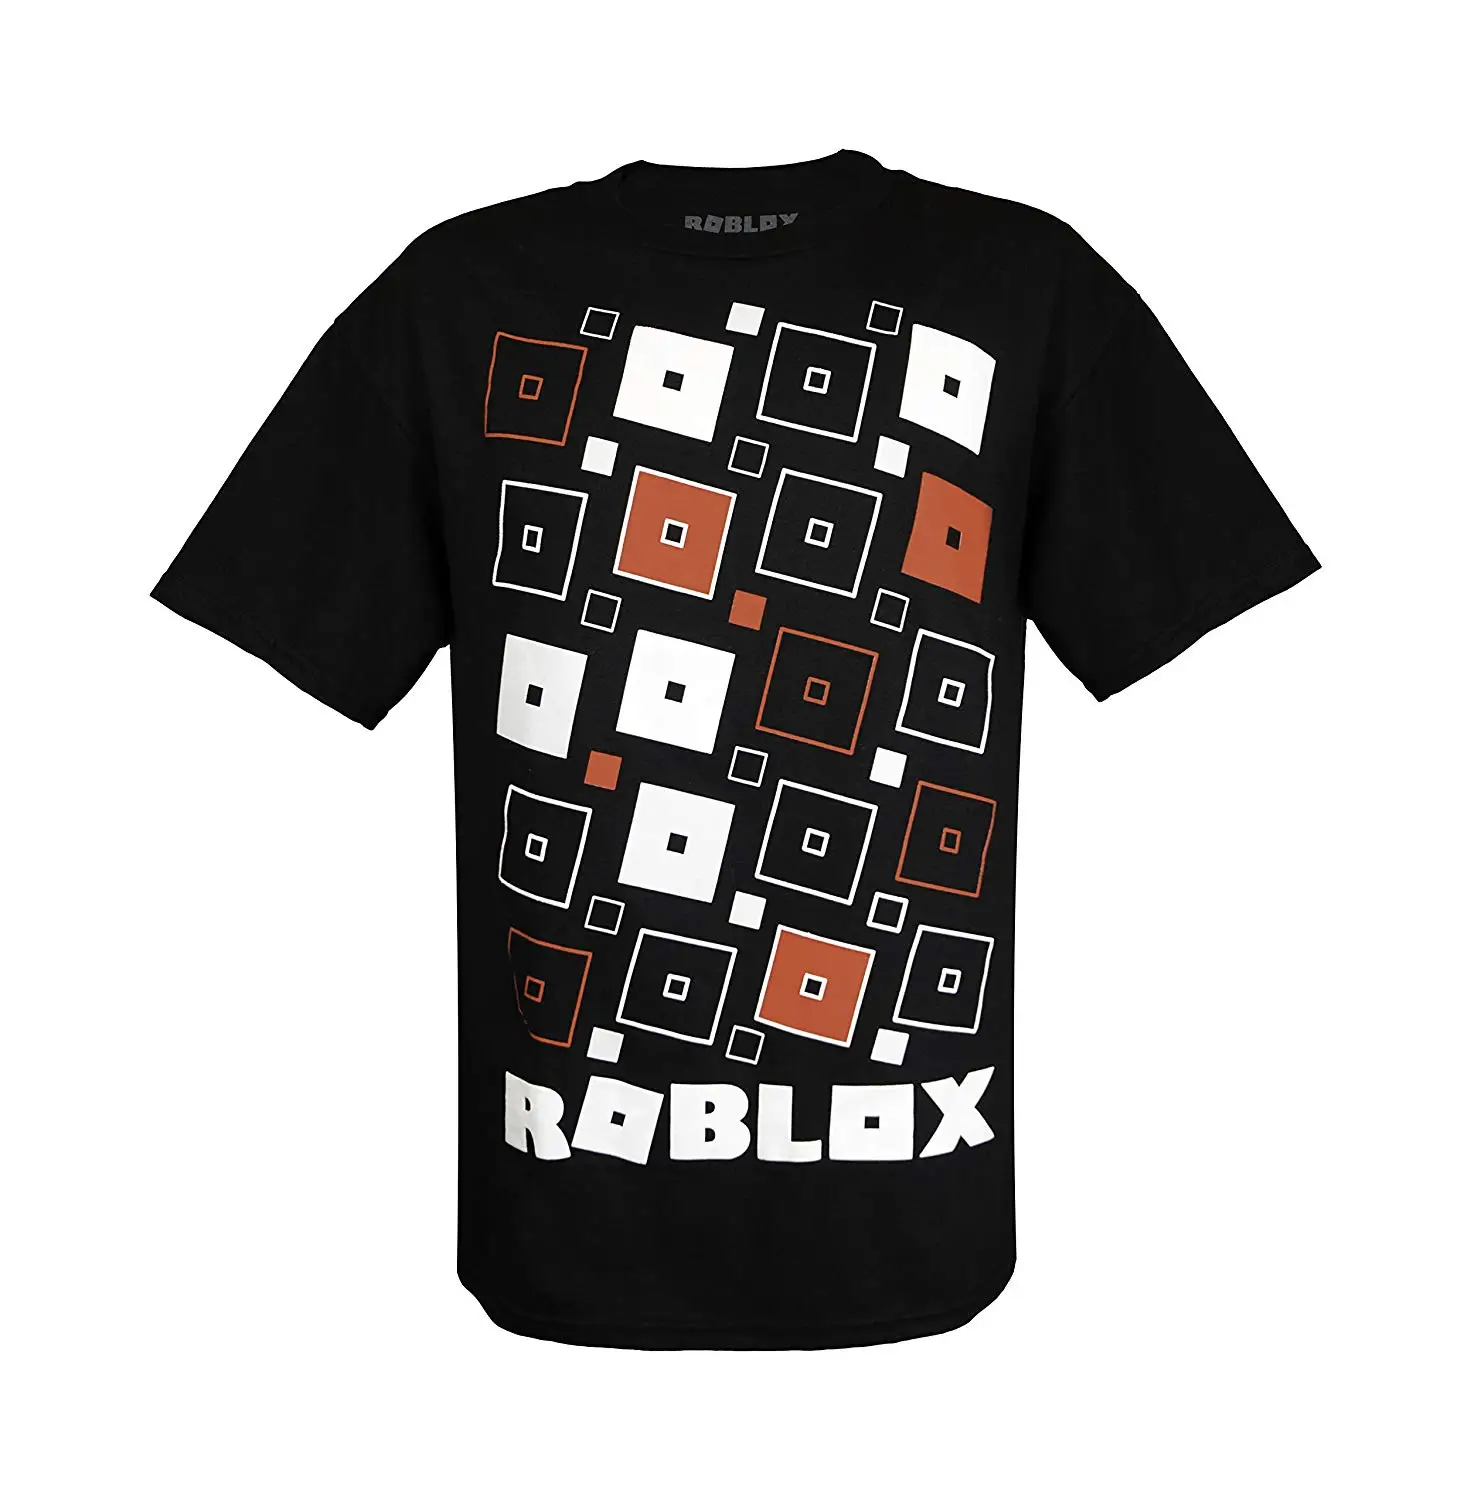 Buy Roblox Game Play With Builderman Character Glow In The Dark For Young Kids Boys And Girls Black Tshirt Tee Medium In Cheap Price On Alibaba Com - roblox t shirt builderman